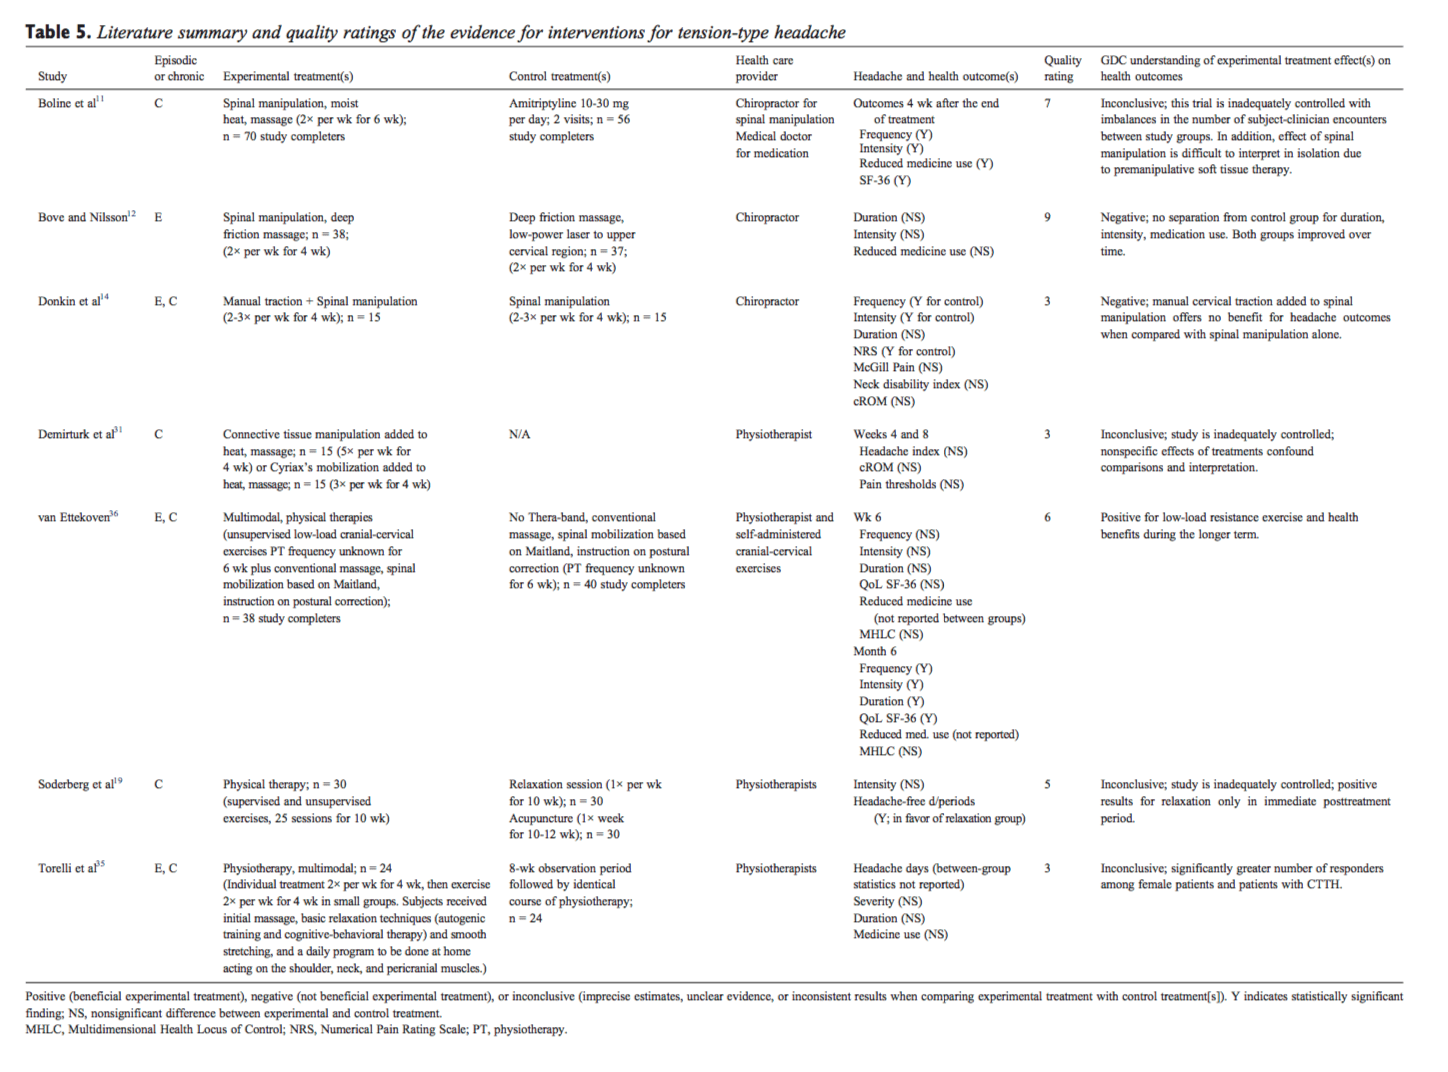 Table 5 Literature Summary and Quality Ratings of the Evidence for Interventions for Tension-Type Headache